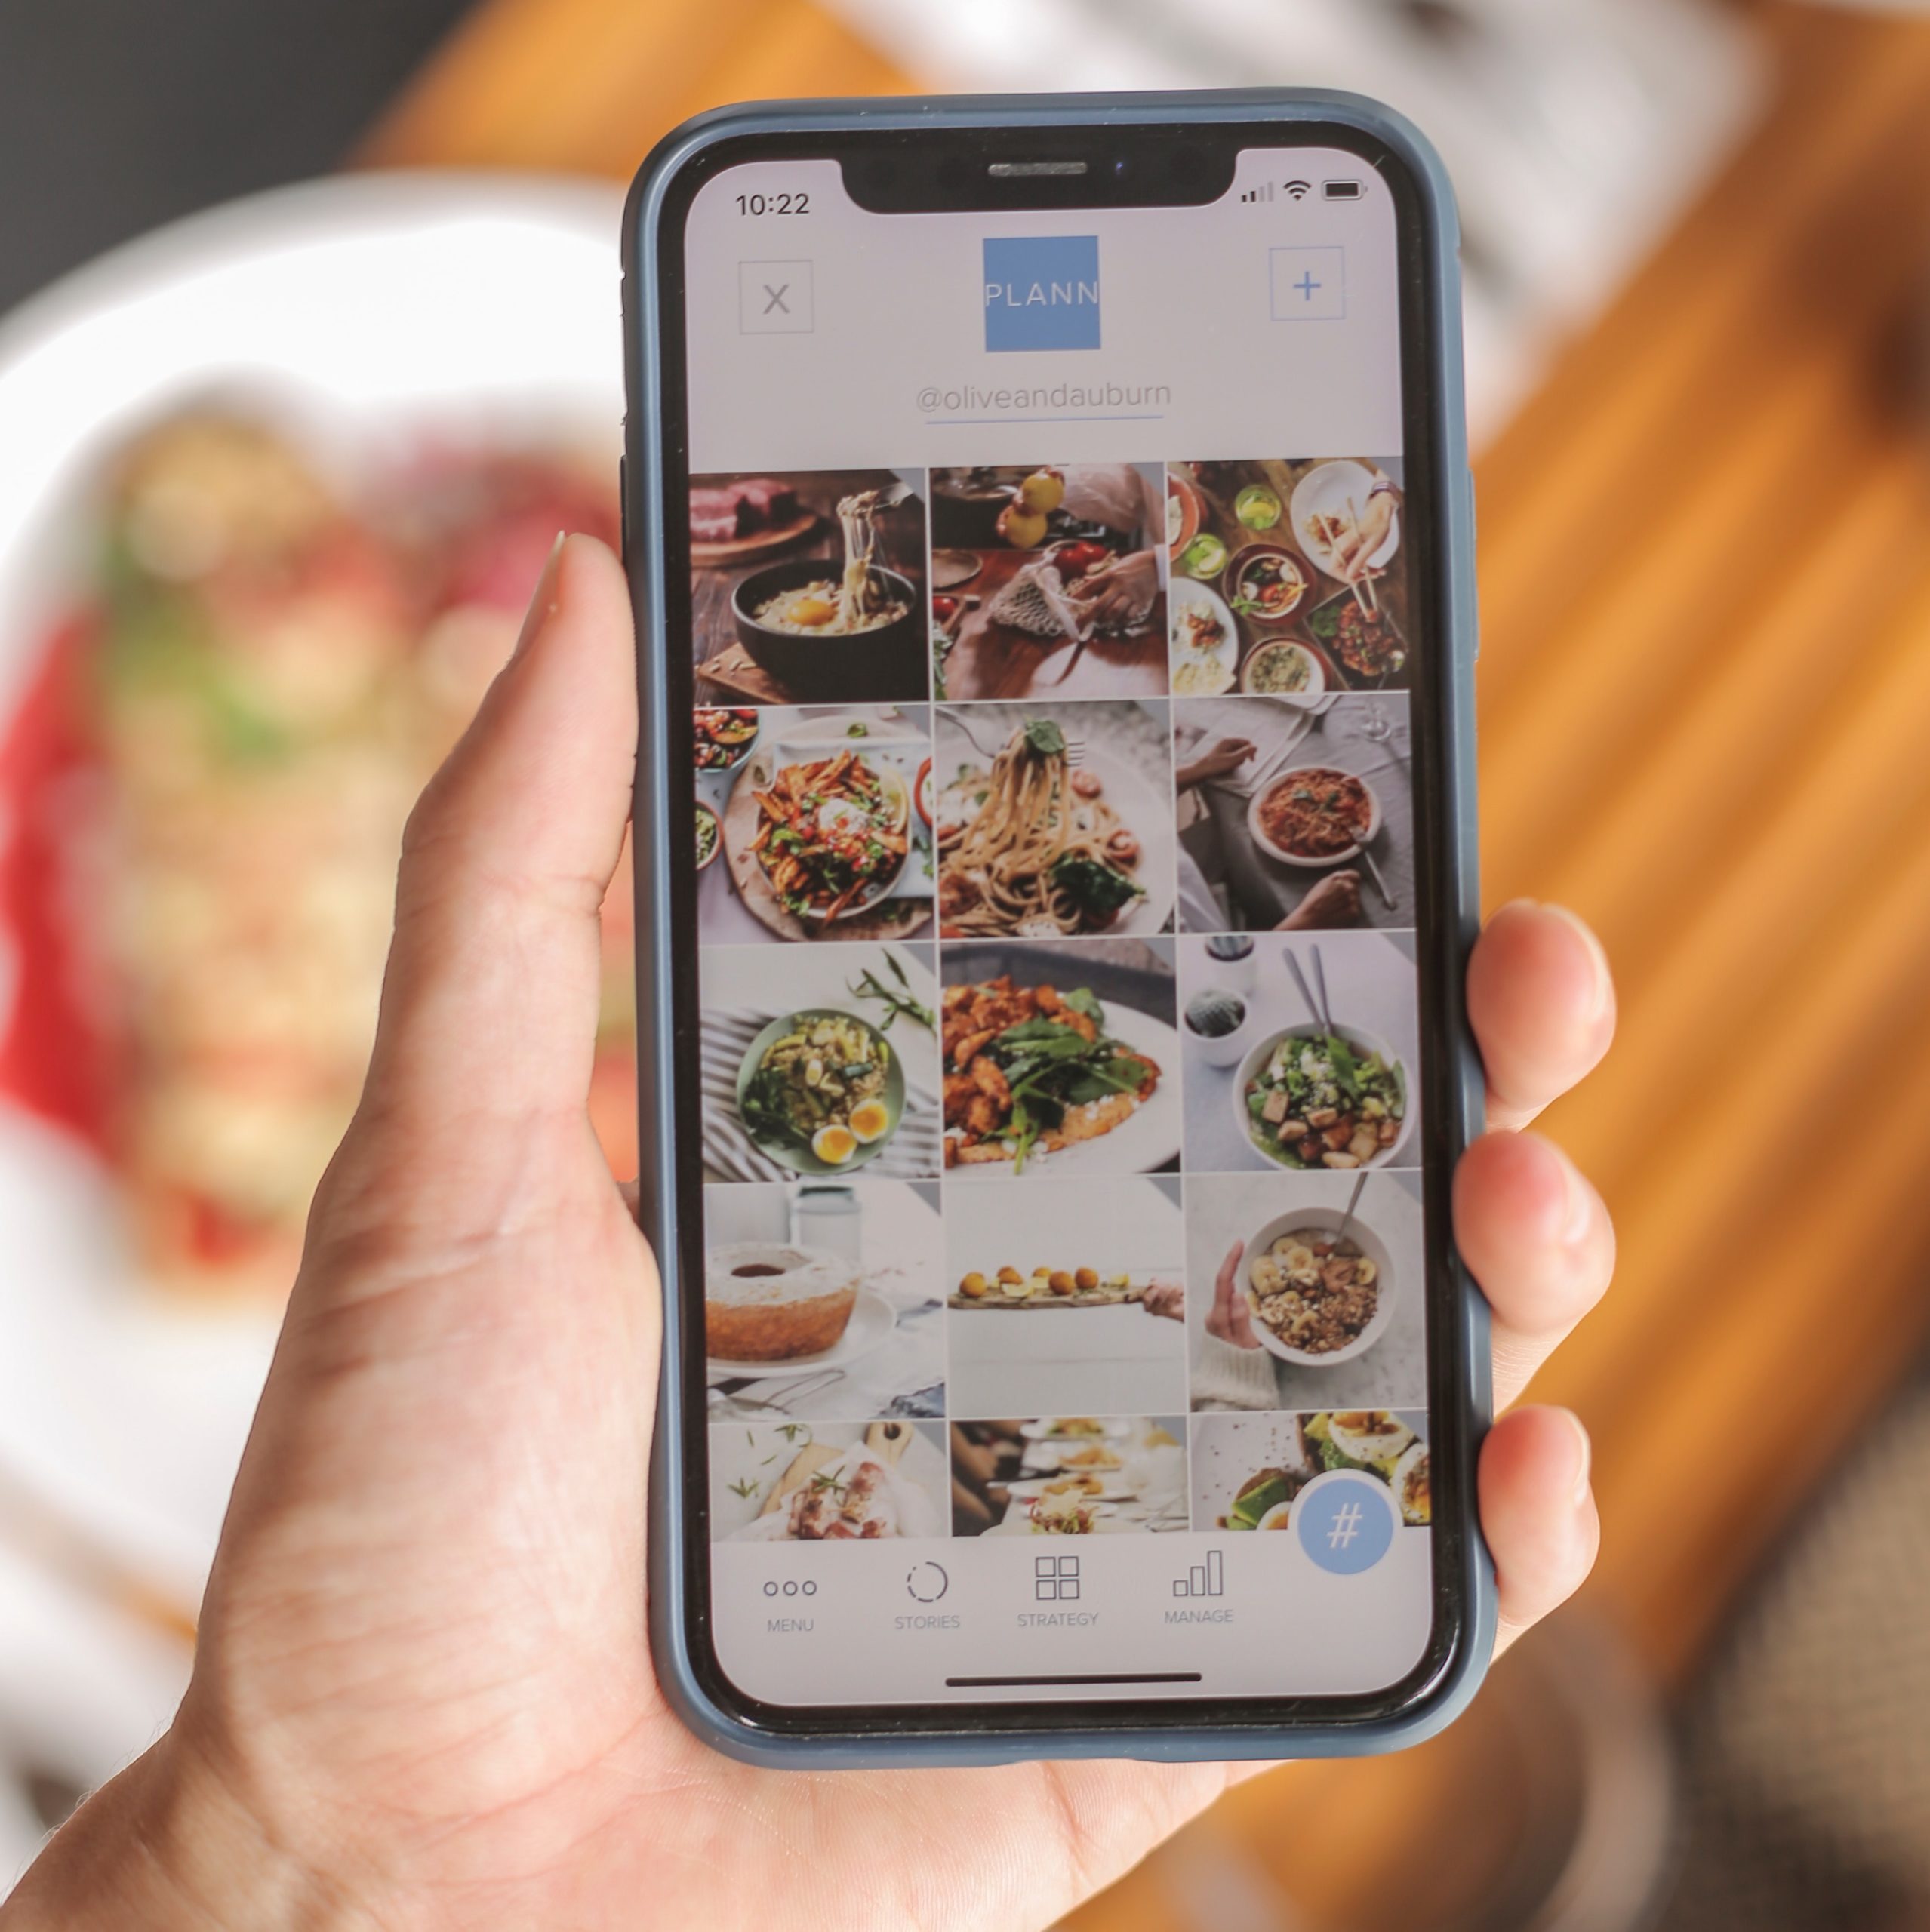 iPhone displaying Instagram feed of food images; blog: How to Increase Engagement with Instagram Carousel Posts